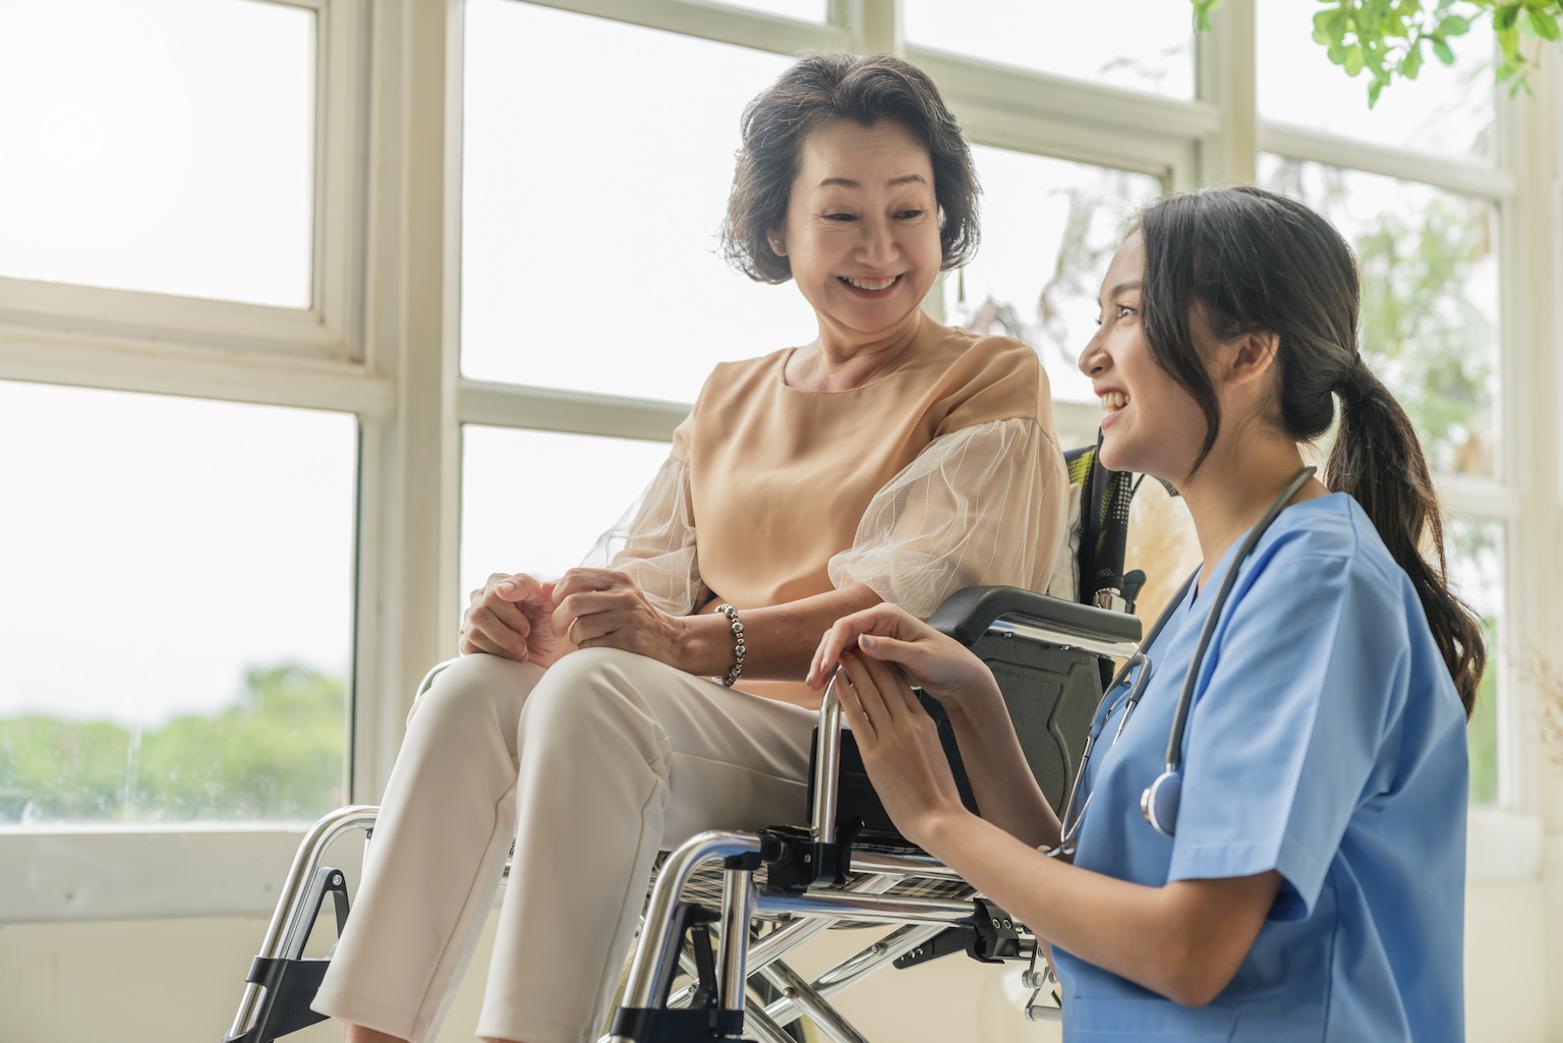 CNA student kneeling next to a patient in a wheelchair